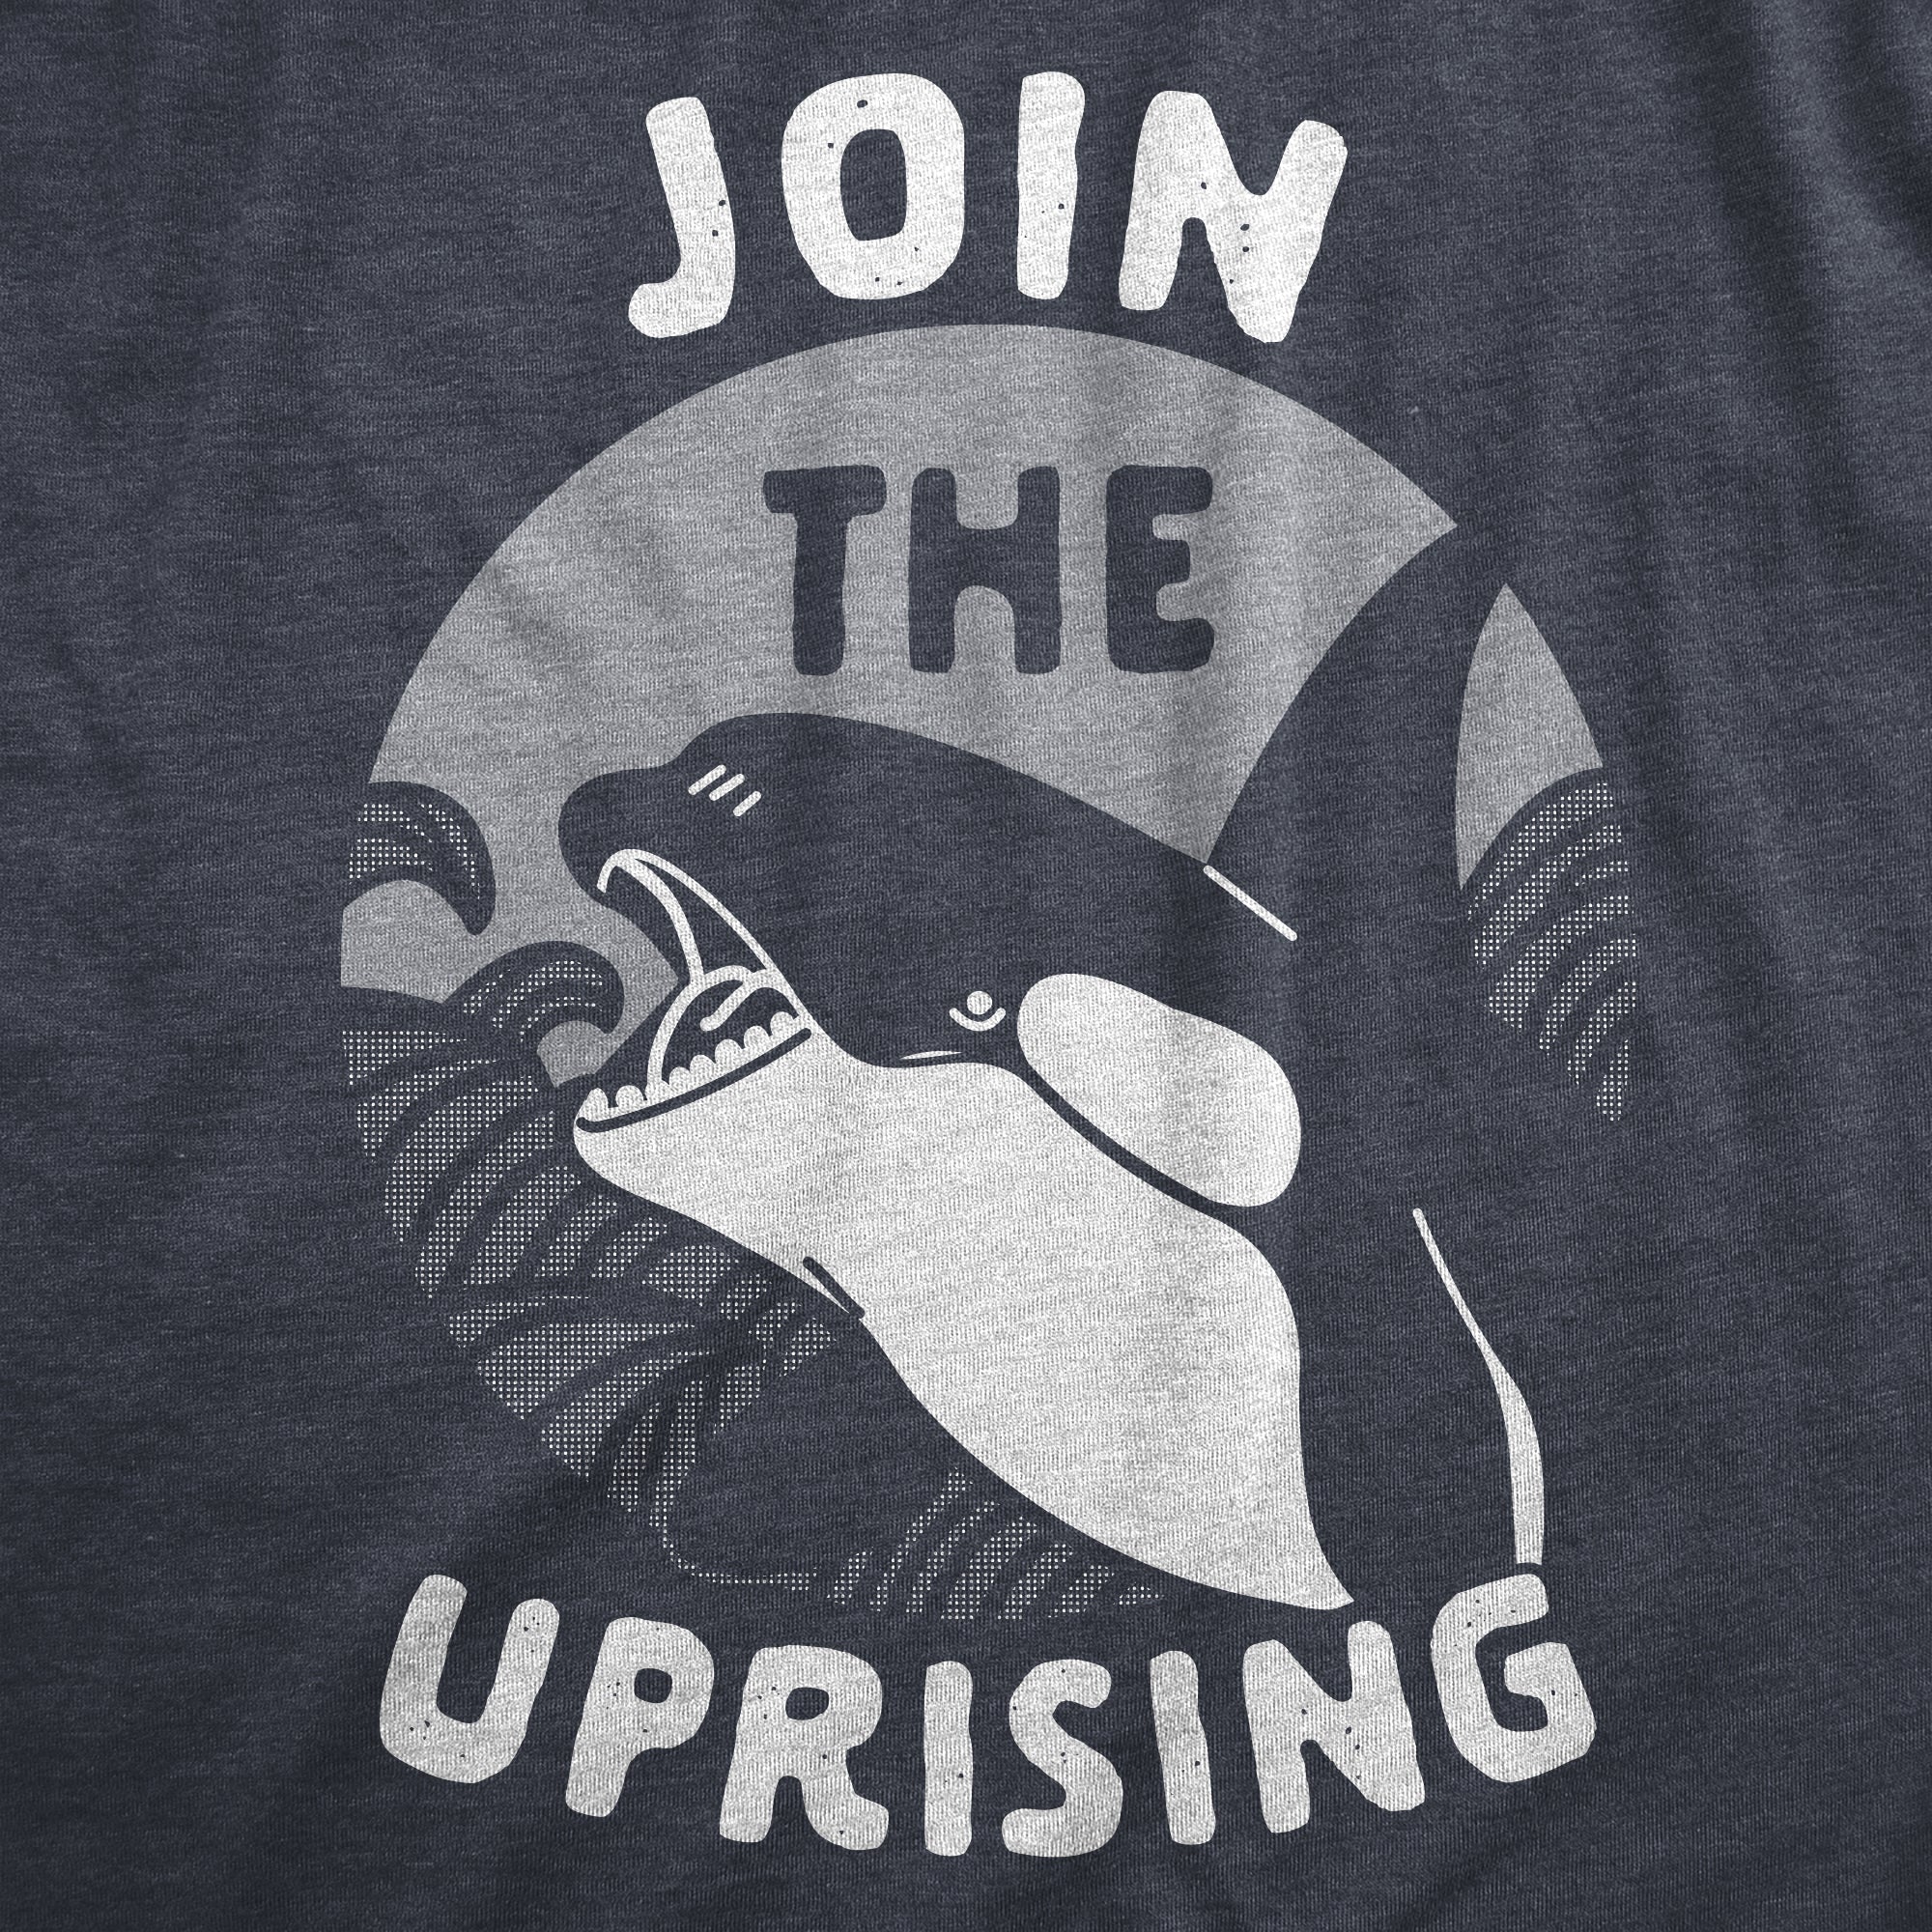 Funny Heather Navy - UPRISING Join The Uprising Womens T Shirt Nerdy Animal sarcastic Tee